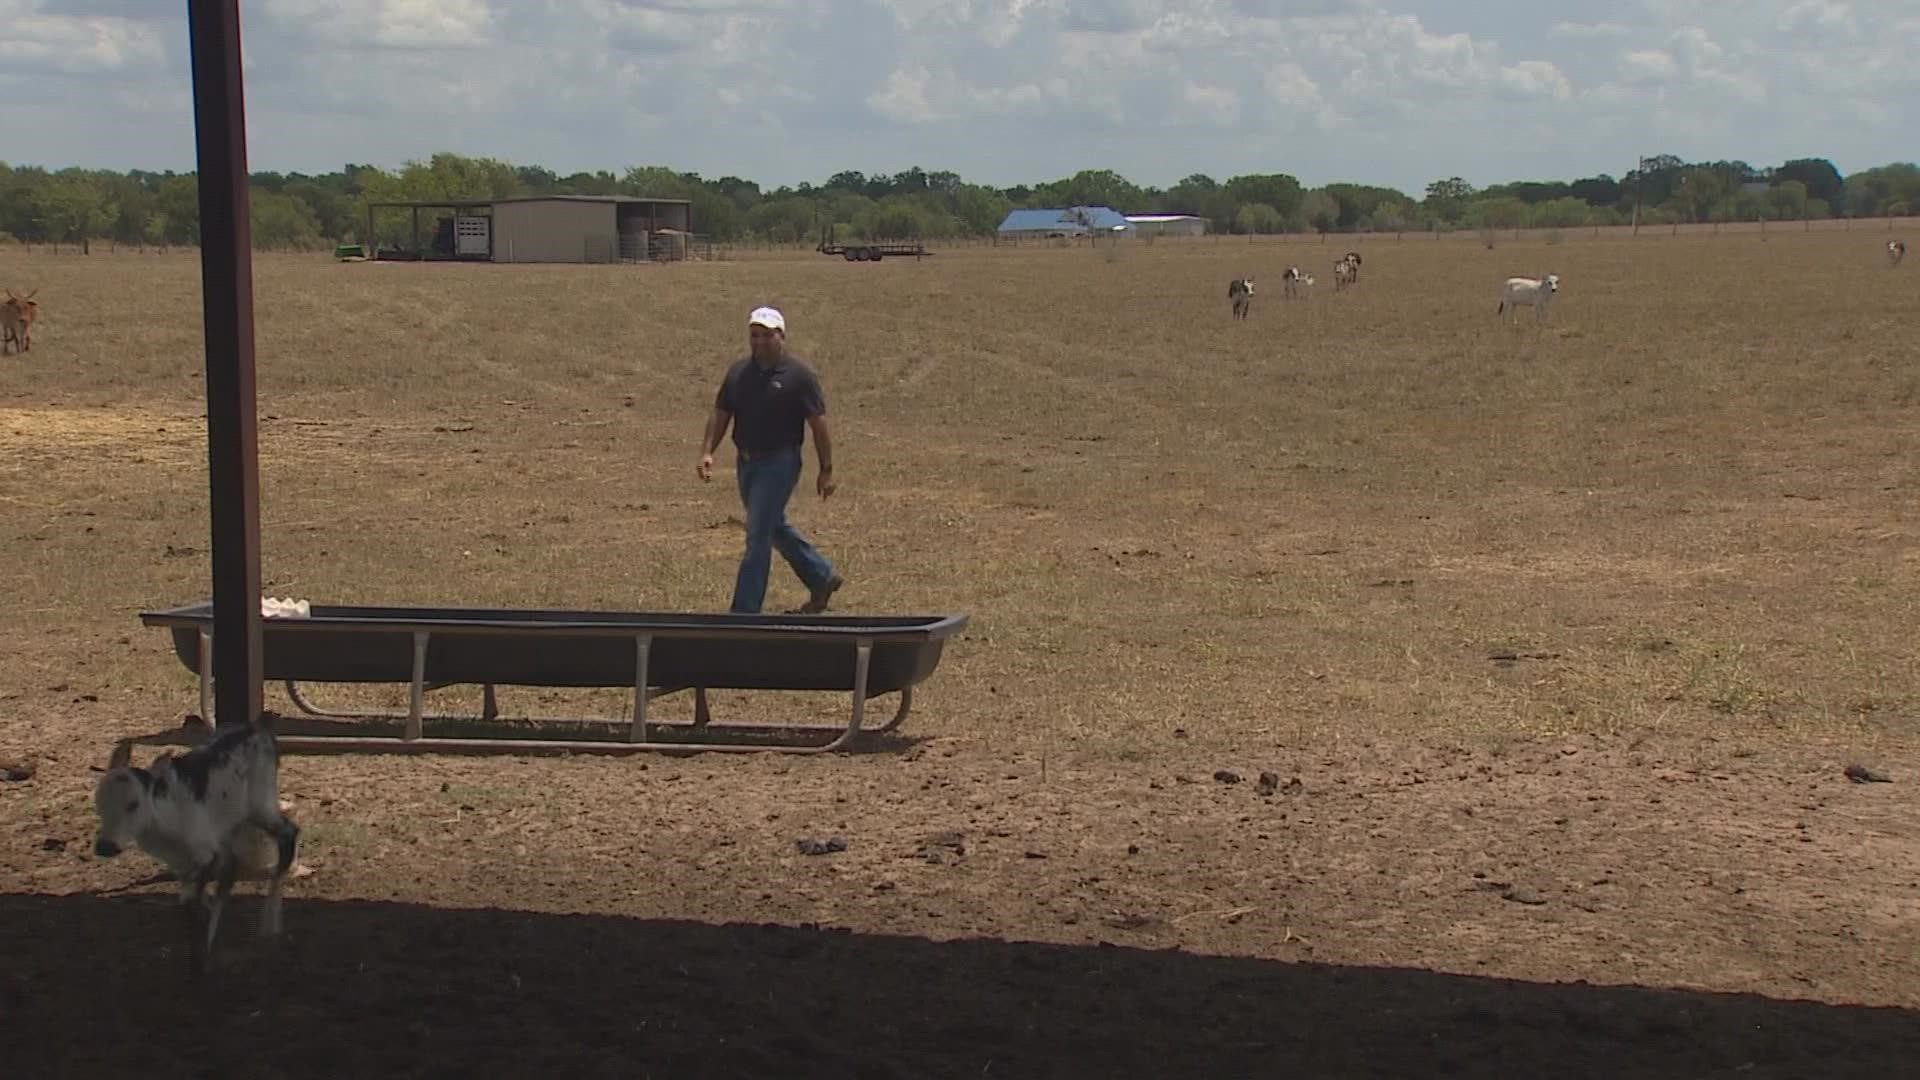 "We haven't had rain out here in probably 60-days," said cattle rancher Homero Barrera.